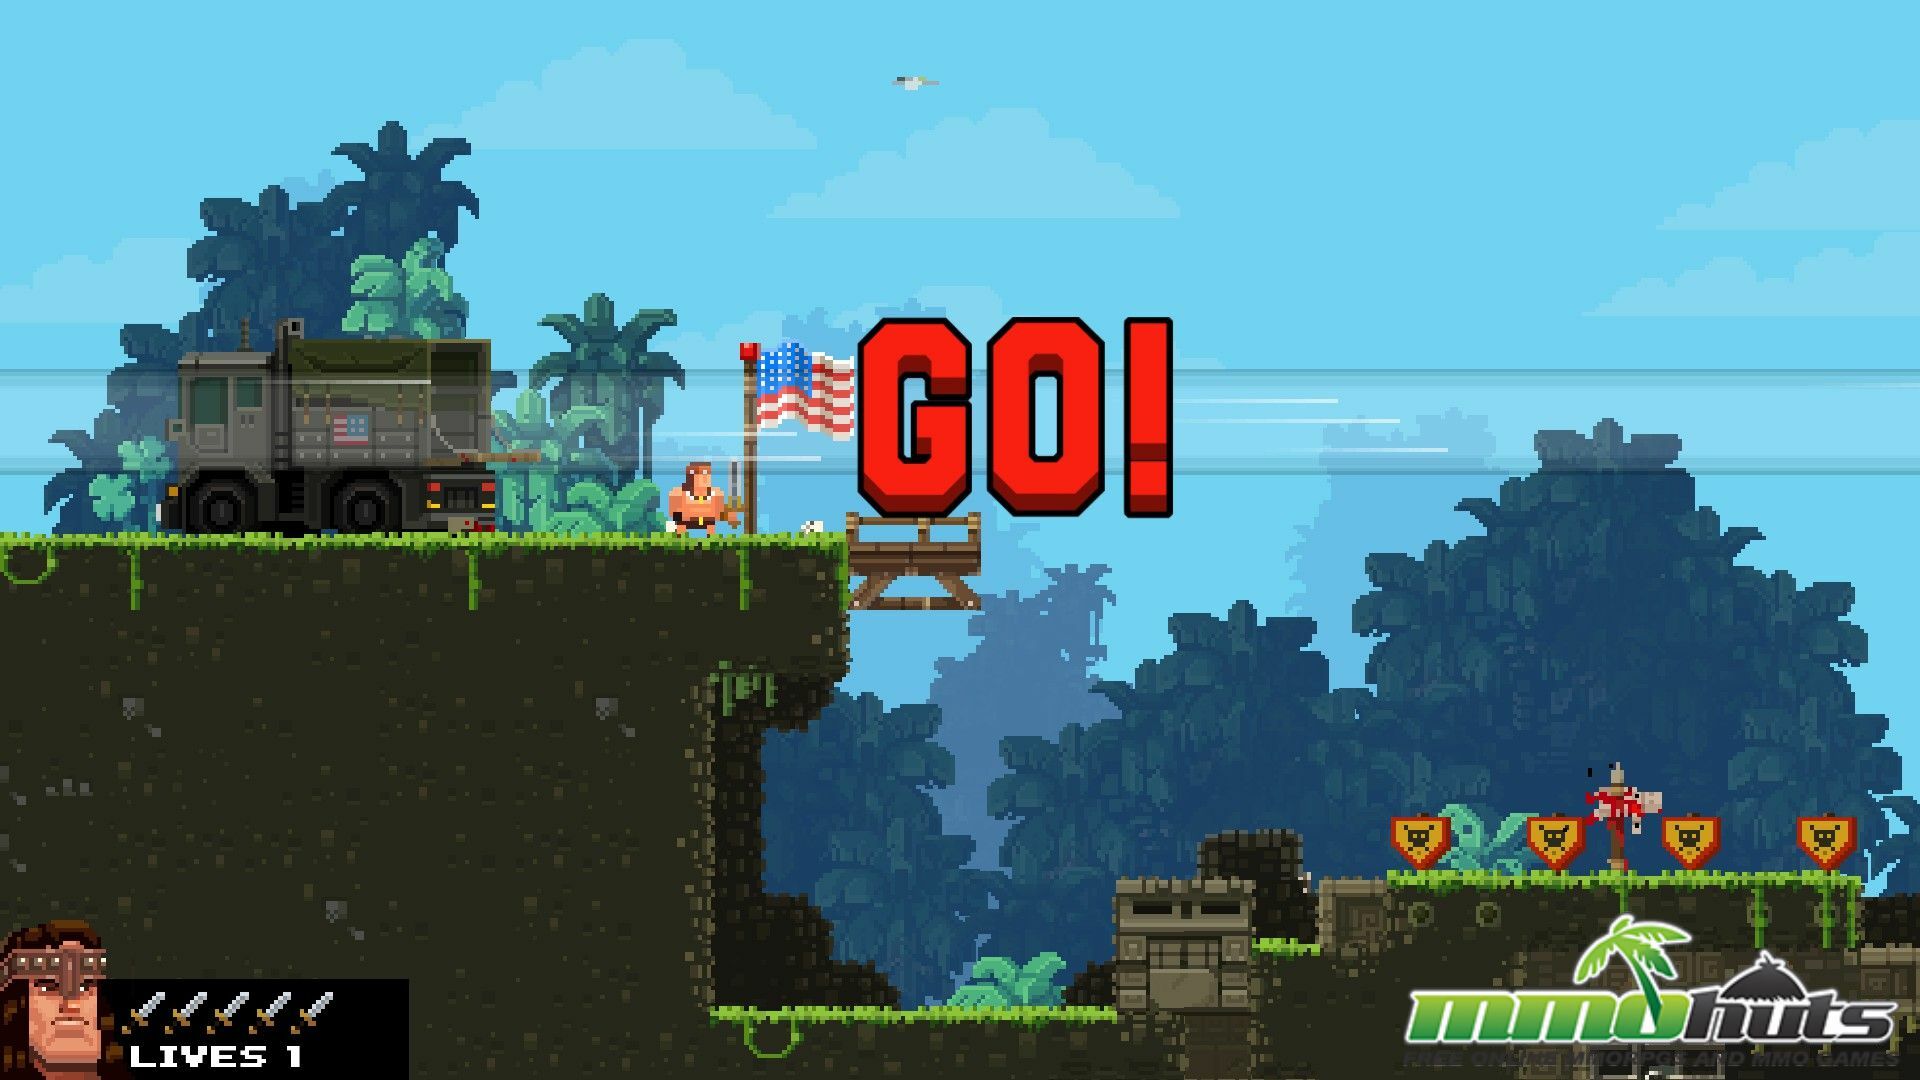 Broforce Launch Review